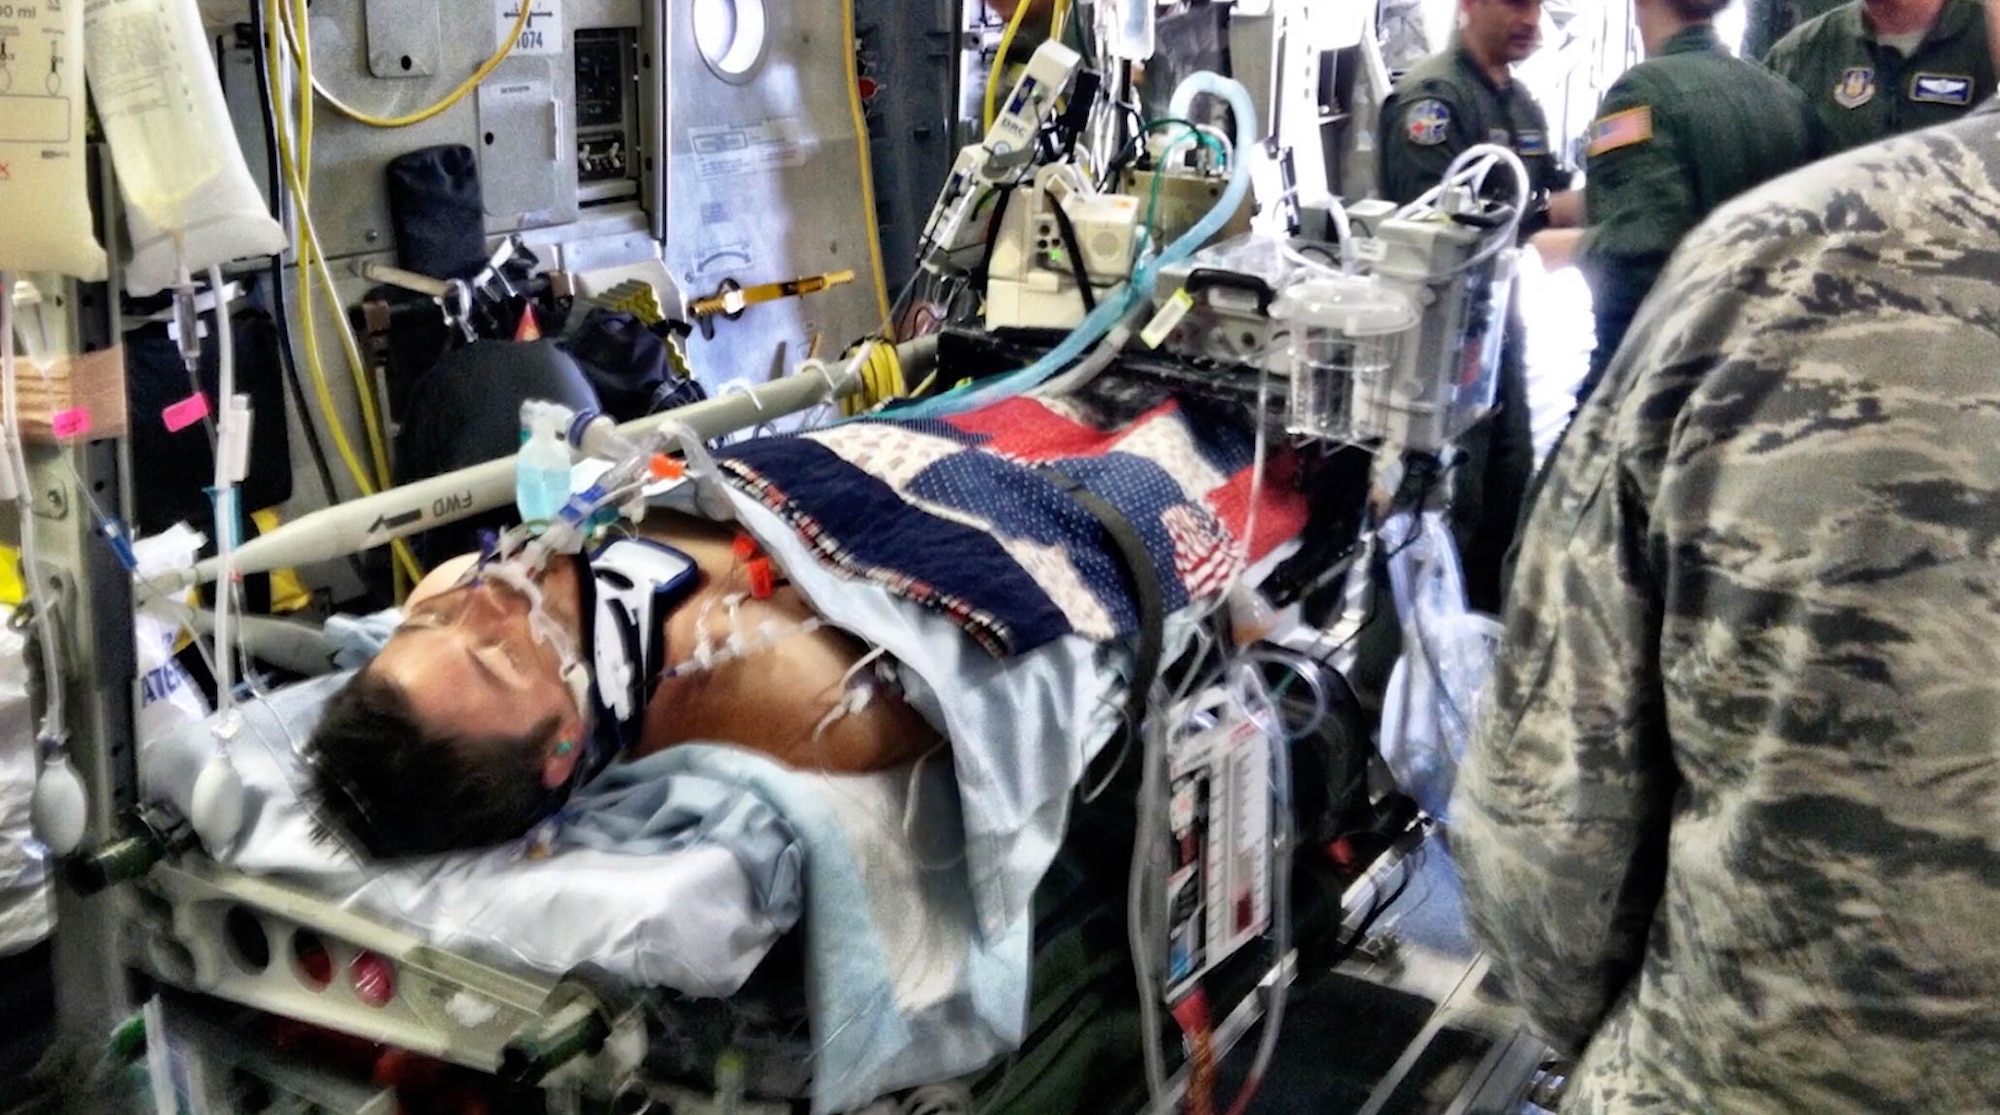 U.S. Air Force 2nd Lt. Nate Nelson, 22nd Special Tactics Squadron intelligence officer, is transported to the United States on a C-17 Globemaster III medical evacuation flight in 2013. Nelson was critically injured from a rocket attack in Afghanistan during Operation Enduring Freedom four days earlier. (Courtesy photo)